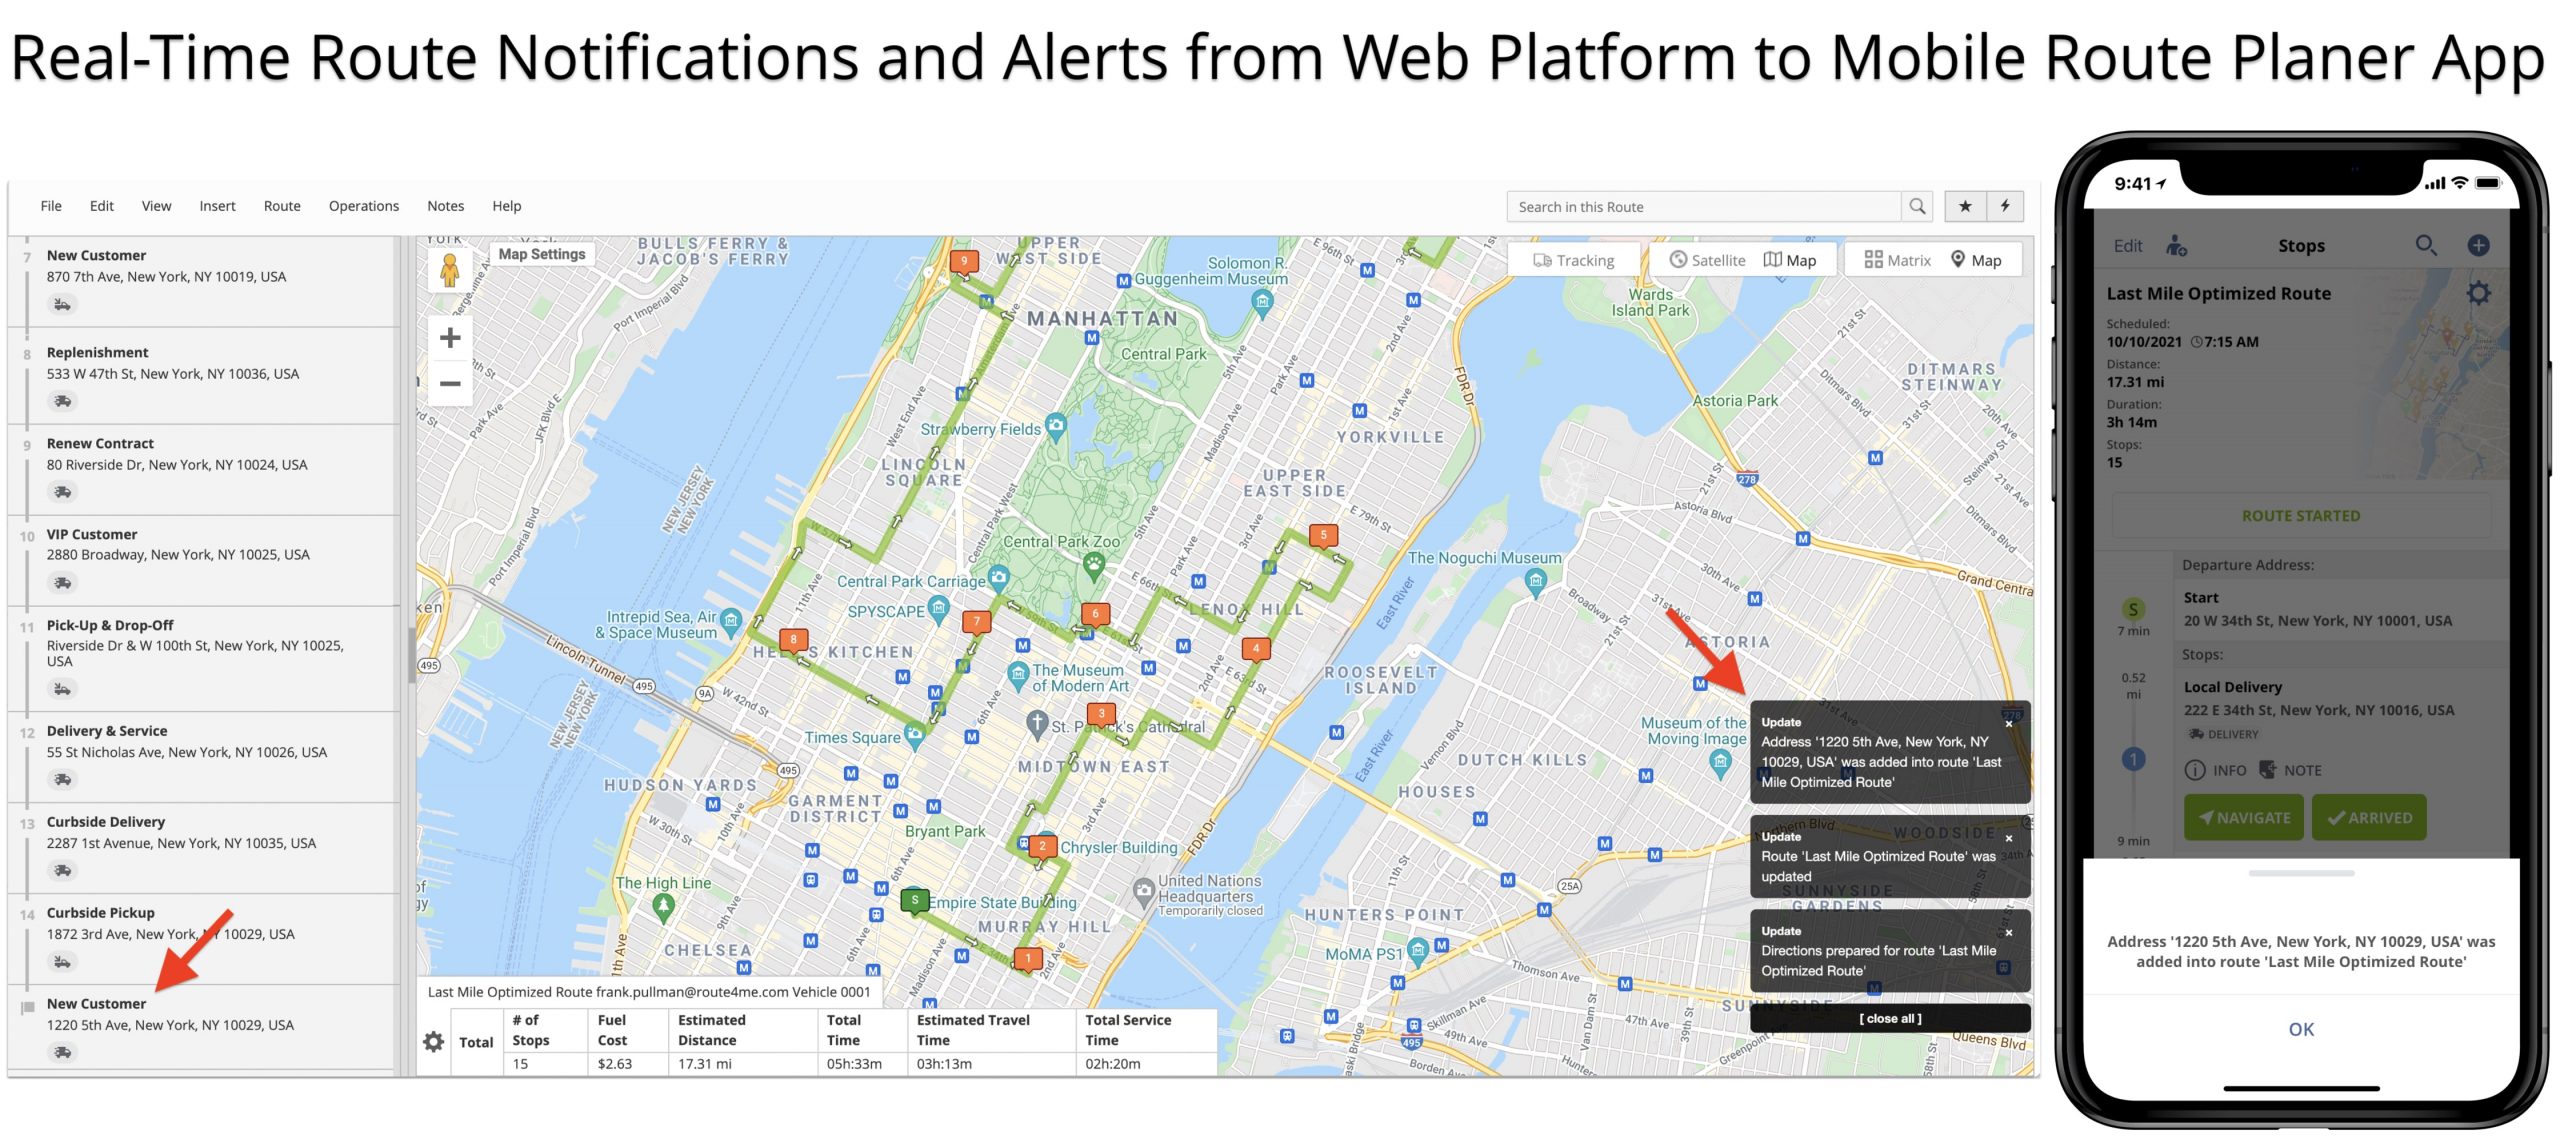 Real-time route updates notifications between Route4Me's Web Platform and Mobile Route Planner app.